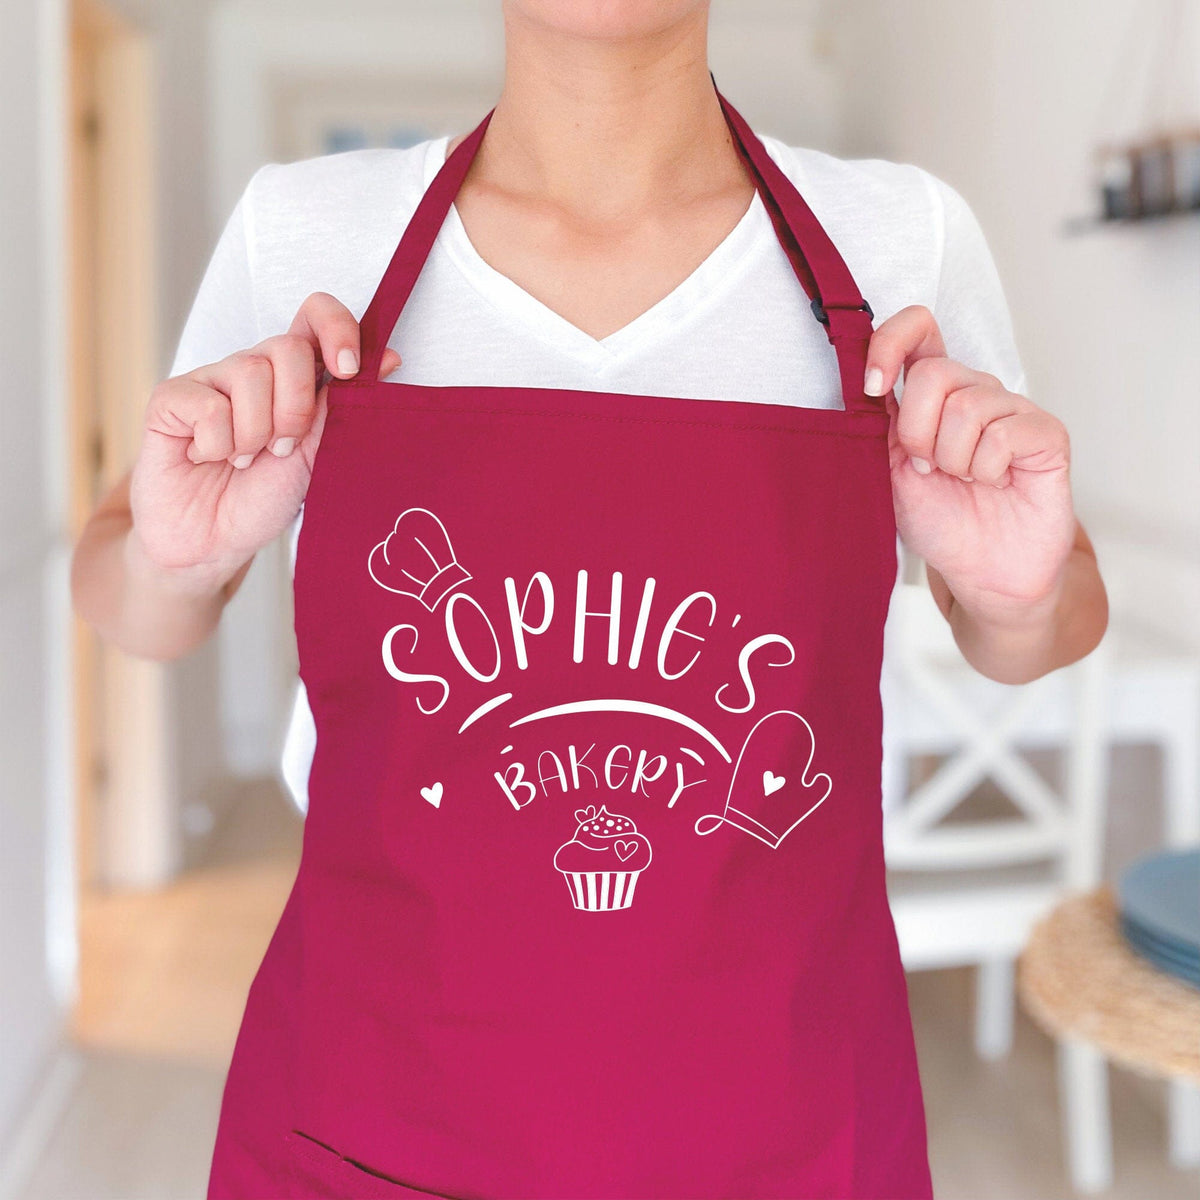 Personalised Kitchen Apron for Mother's Day Gift, Name Kitchen Apron  Cooking Baking Gift, Gift for Mum, Auntie, Granny, Her 